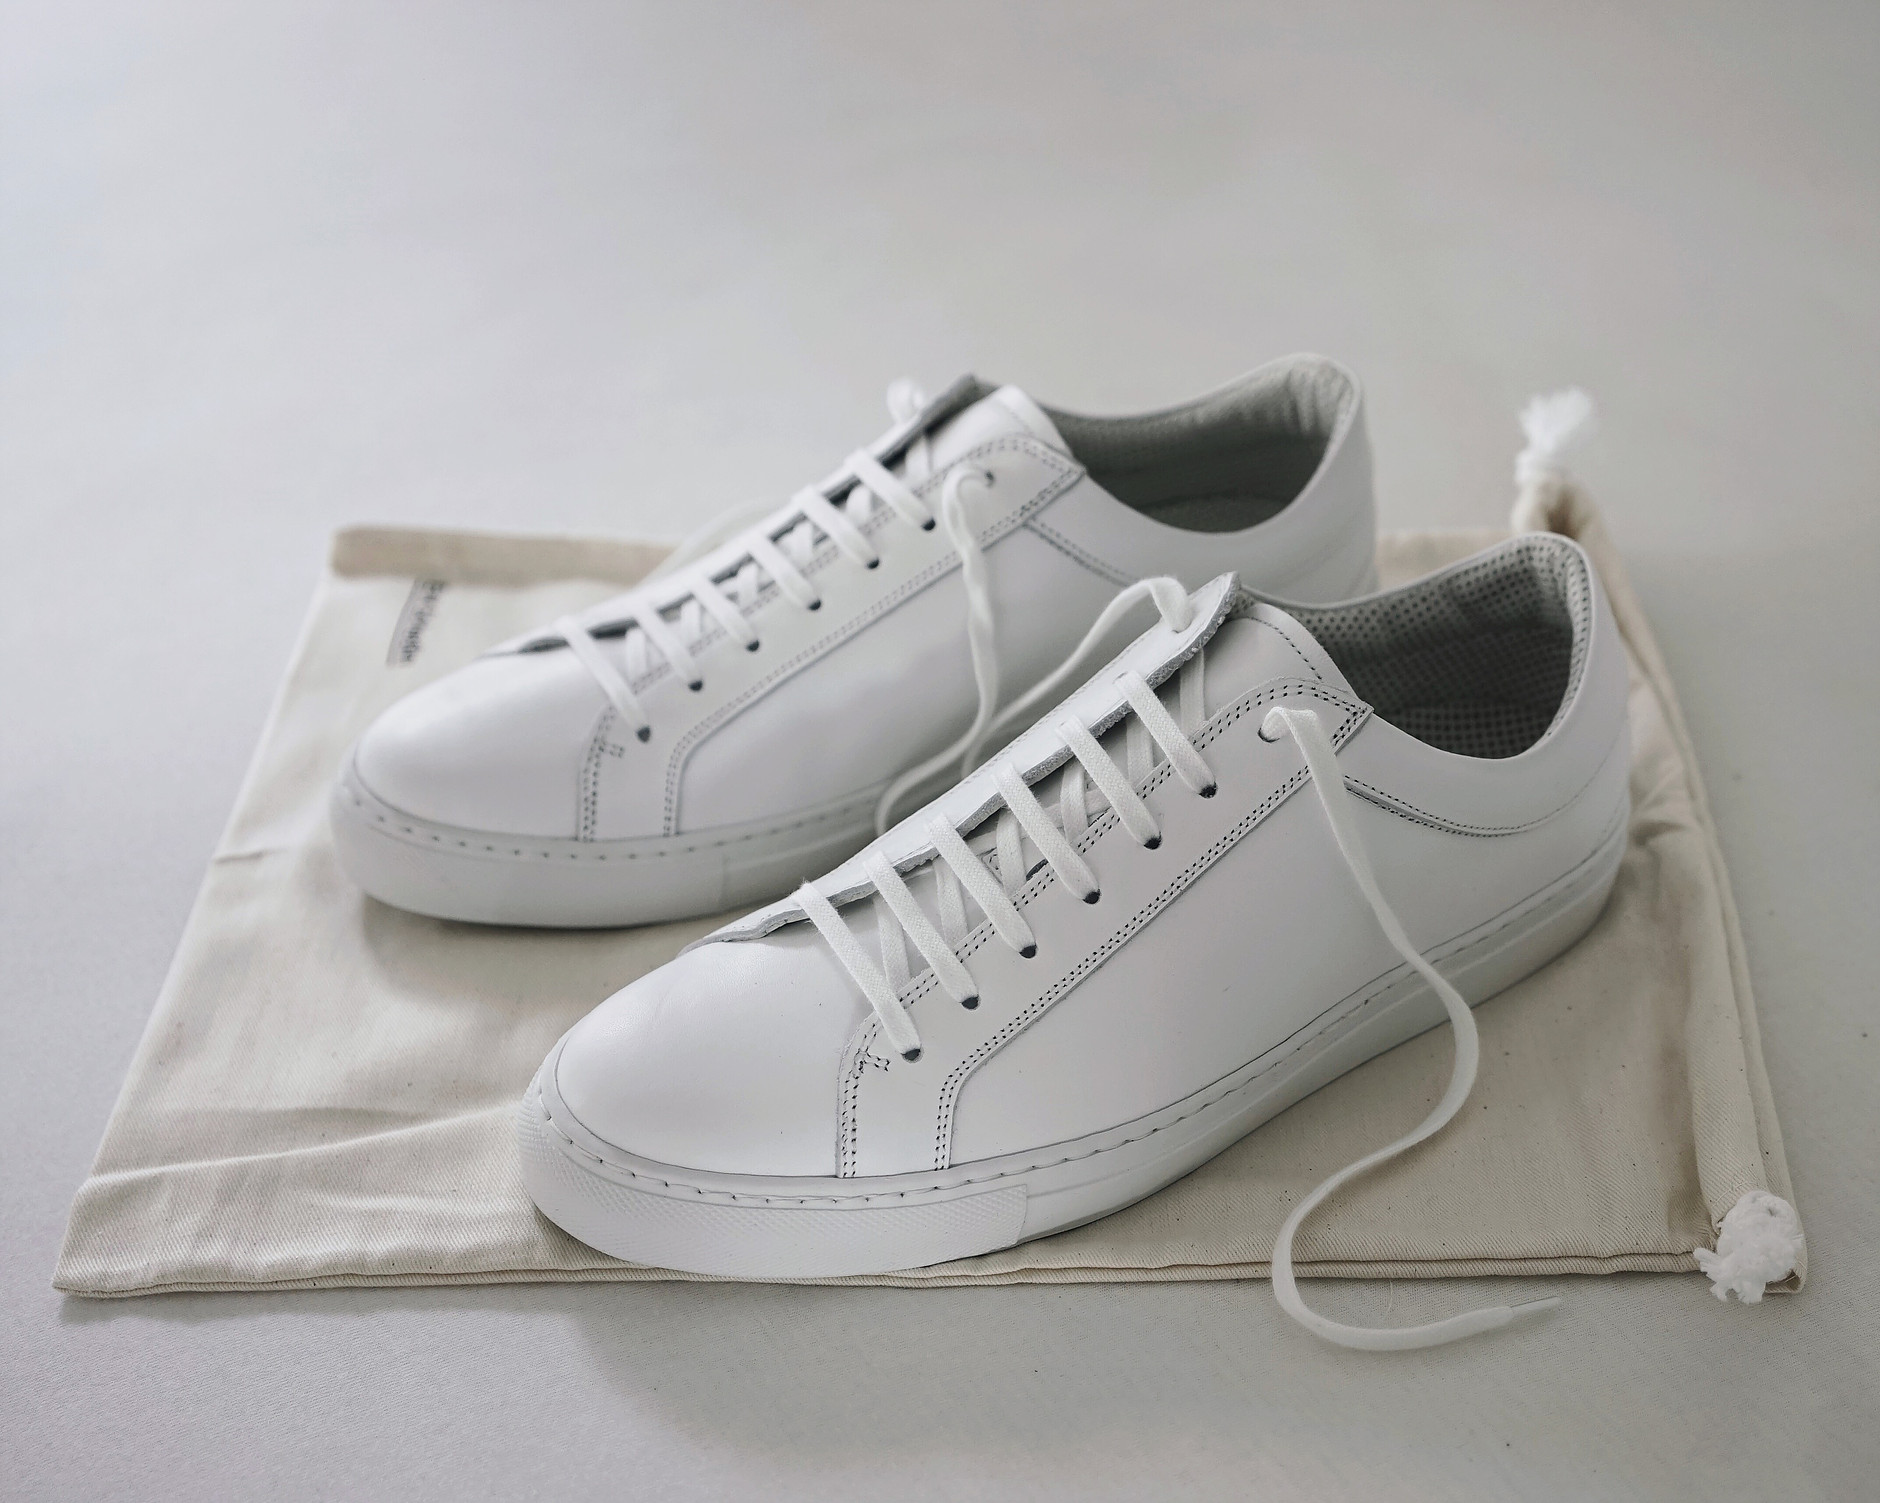 white sneakers by Erik Schedin, handmade in Italy! | Shoes ...